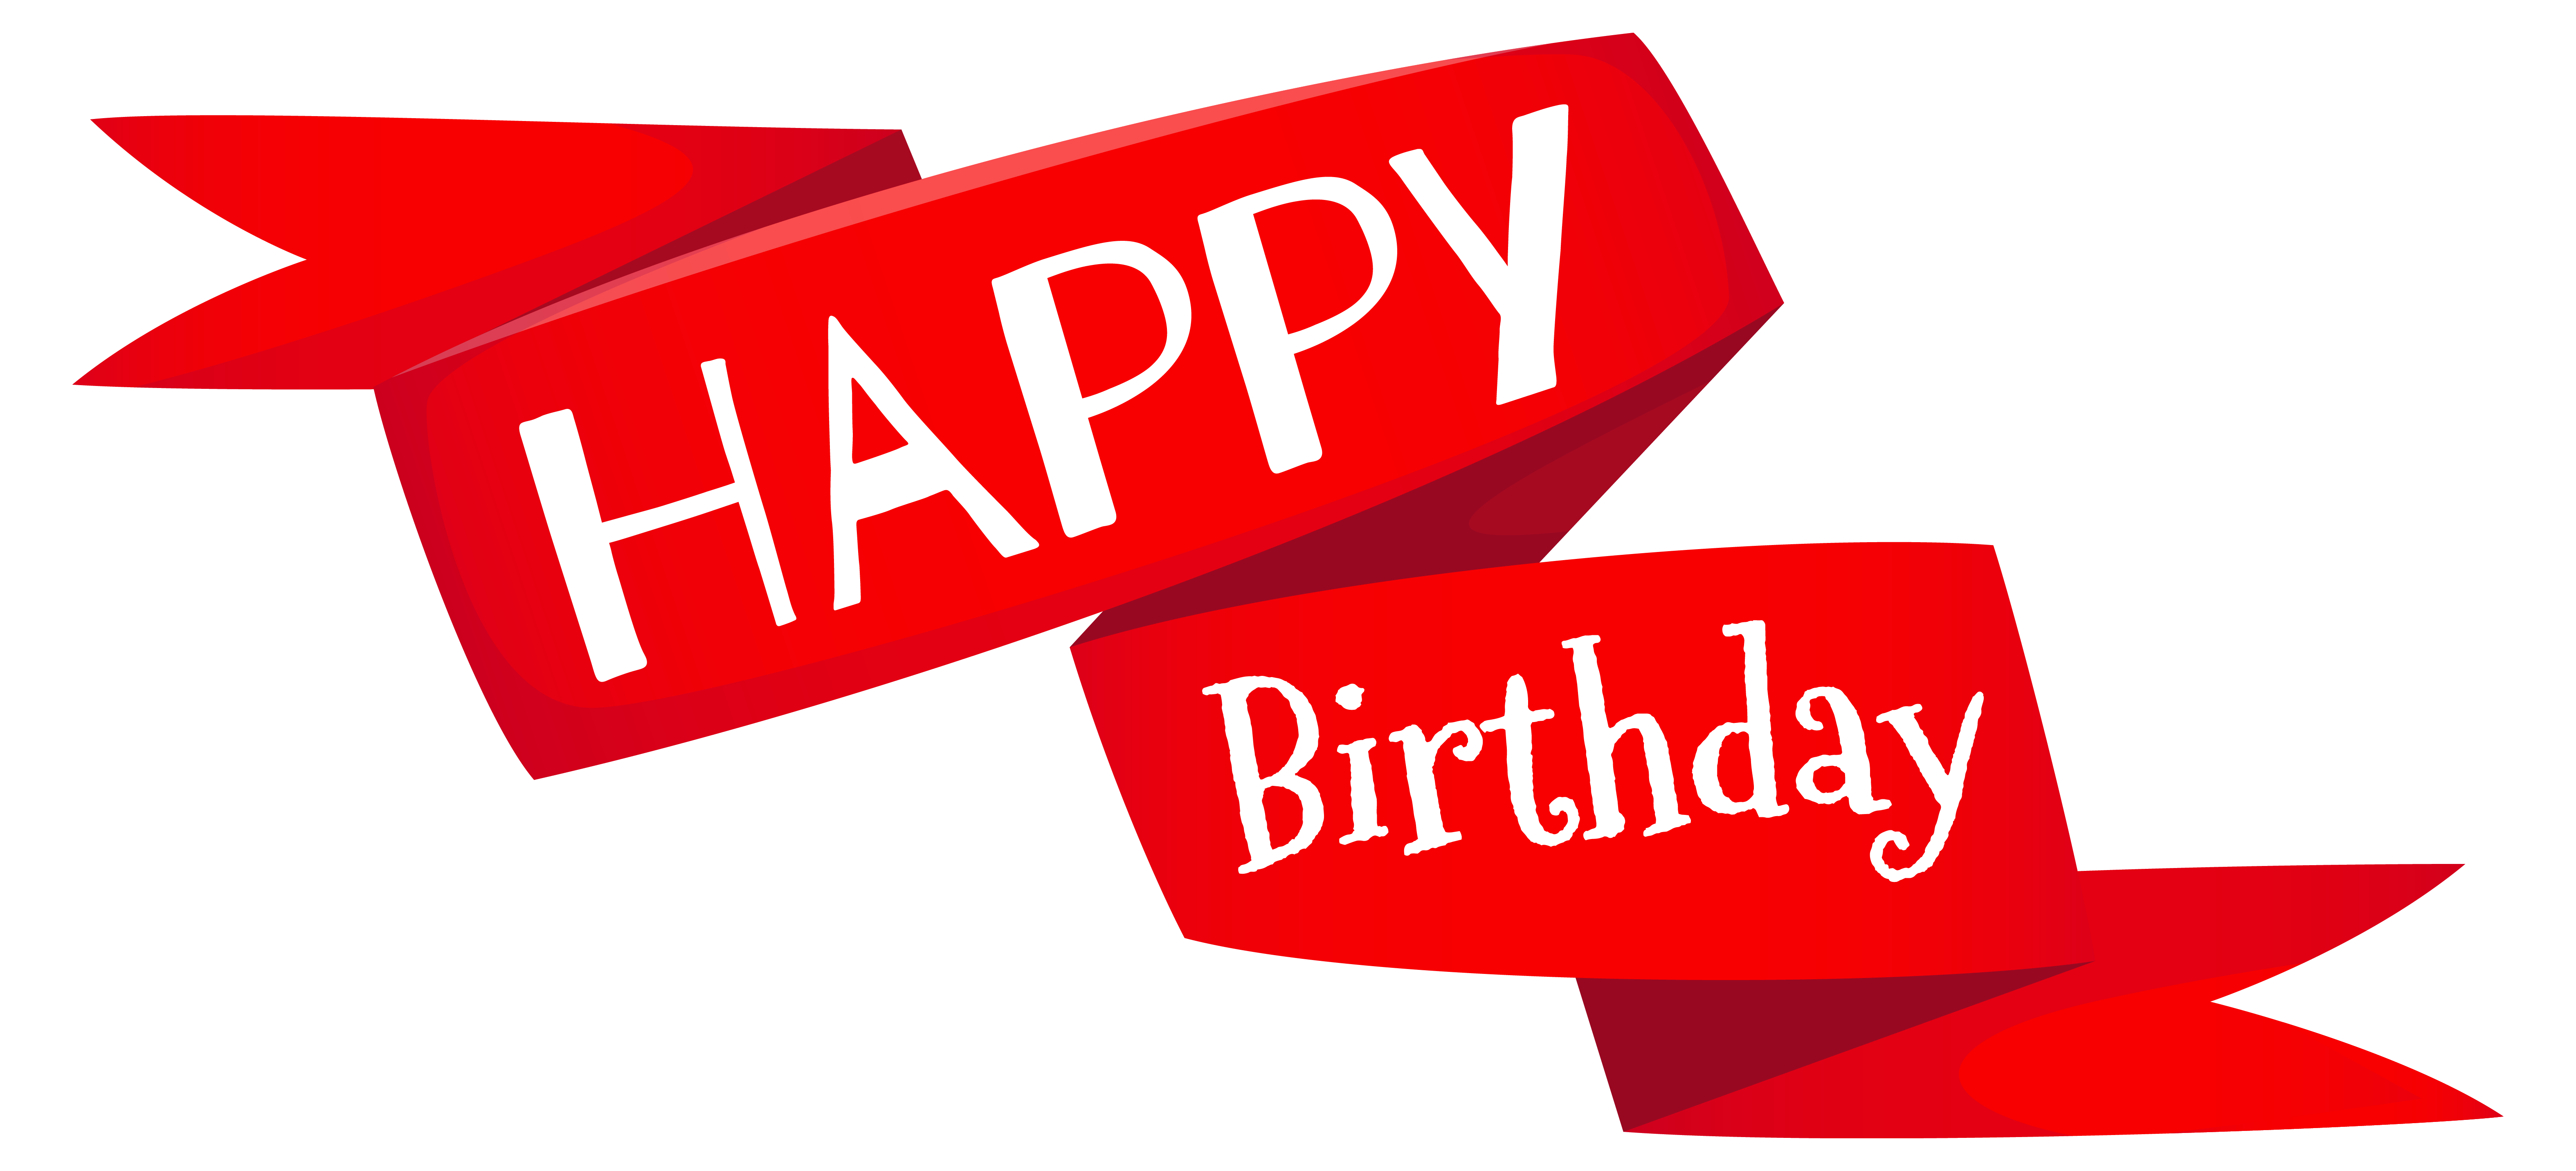 Red happy birthday banner. Website clipart welcome